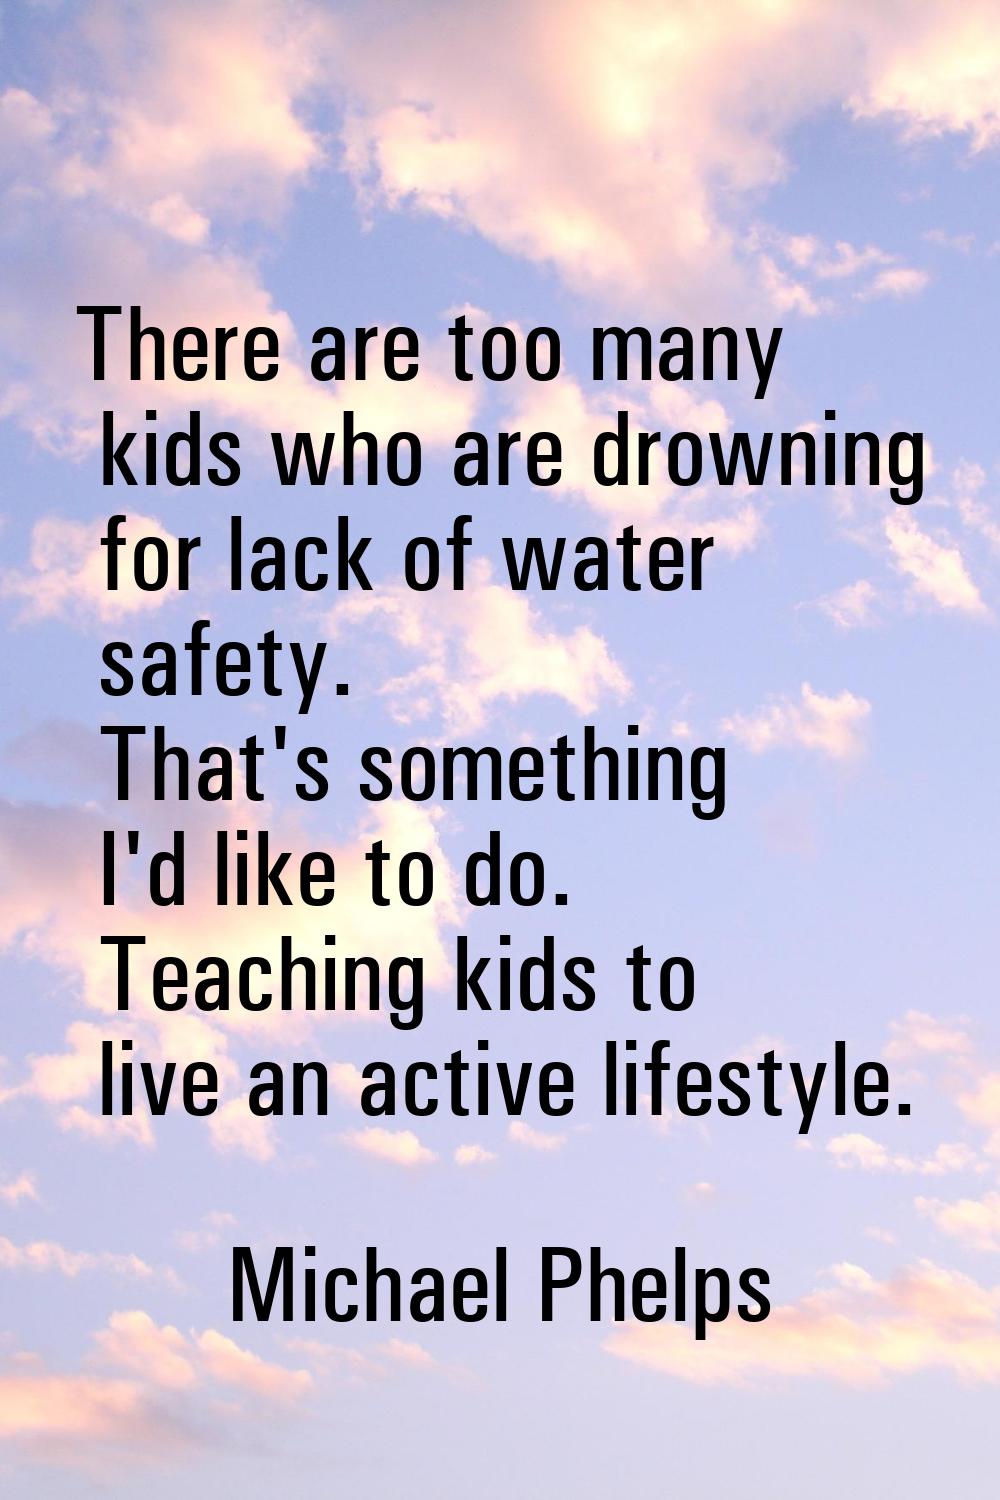 There are too many kids who are drowning for lack of water safety. That's something I'd like to do.